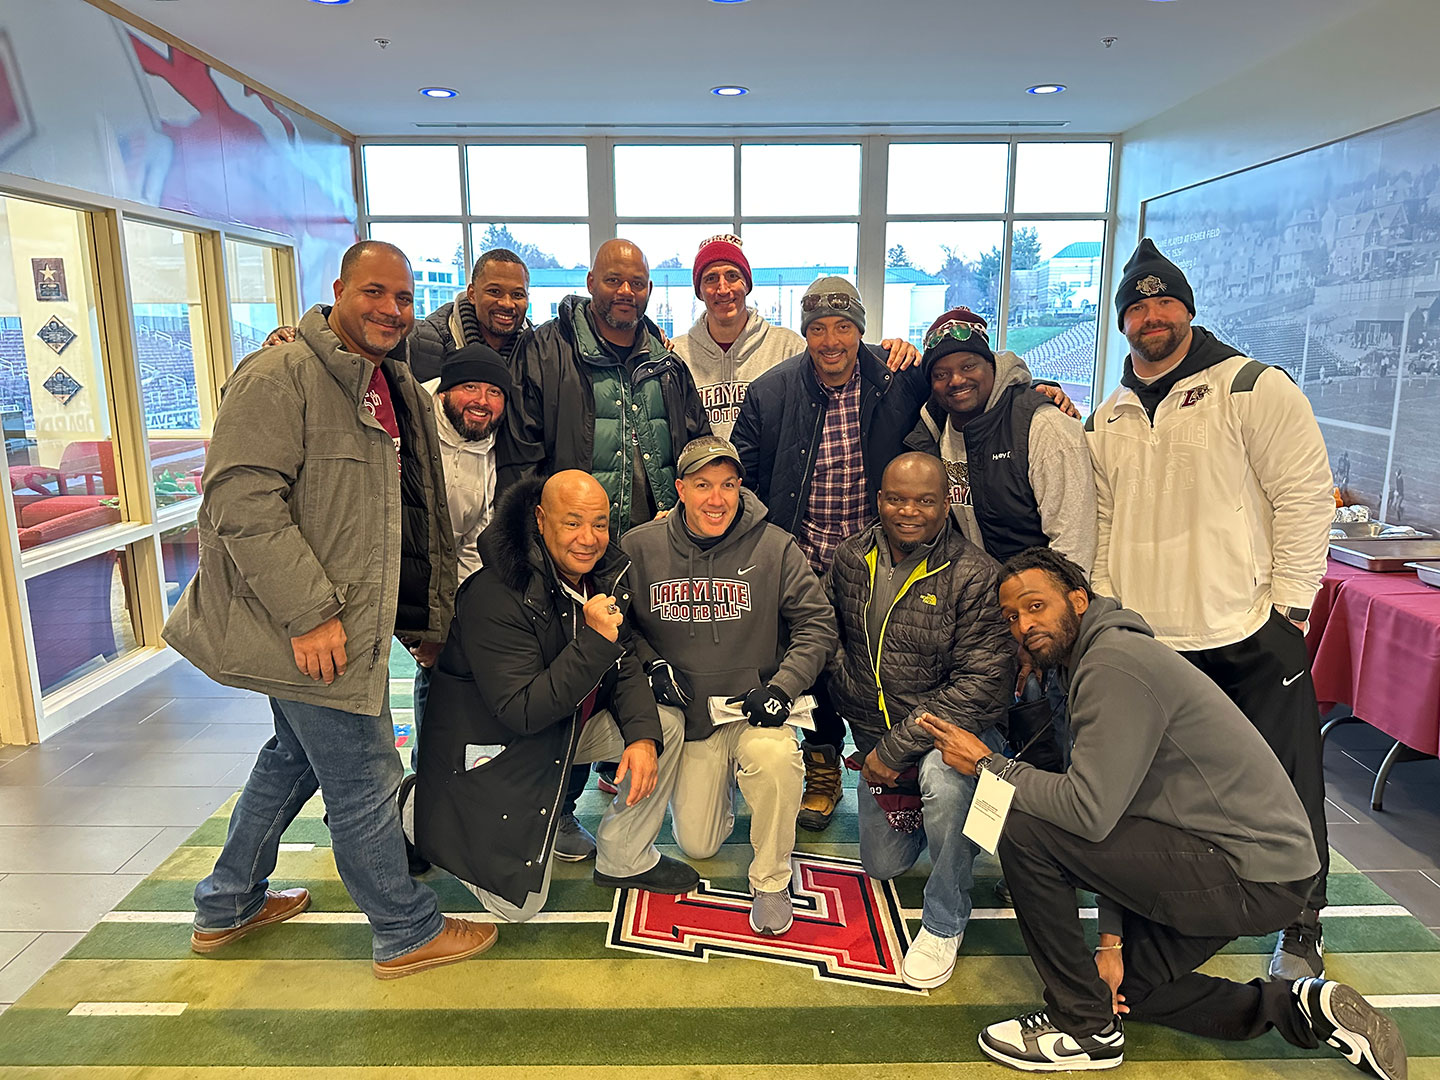 Lafayette College Football alumni pose with Coach John Troxell '94 in Kirby Football House. Coach Troxell is wearing a Lafayette Football sweatshirt. They are smiling at the camera. 